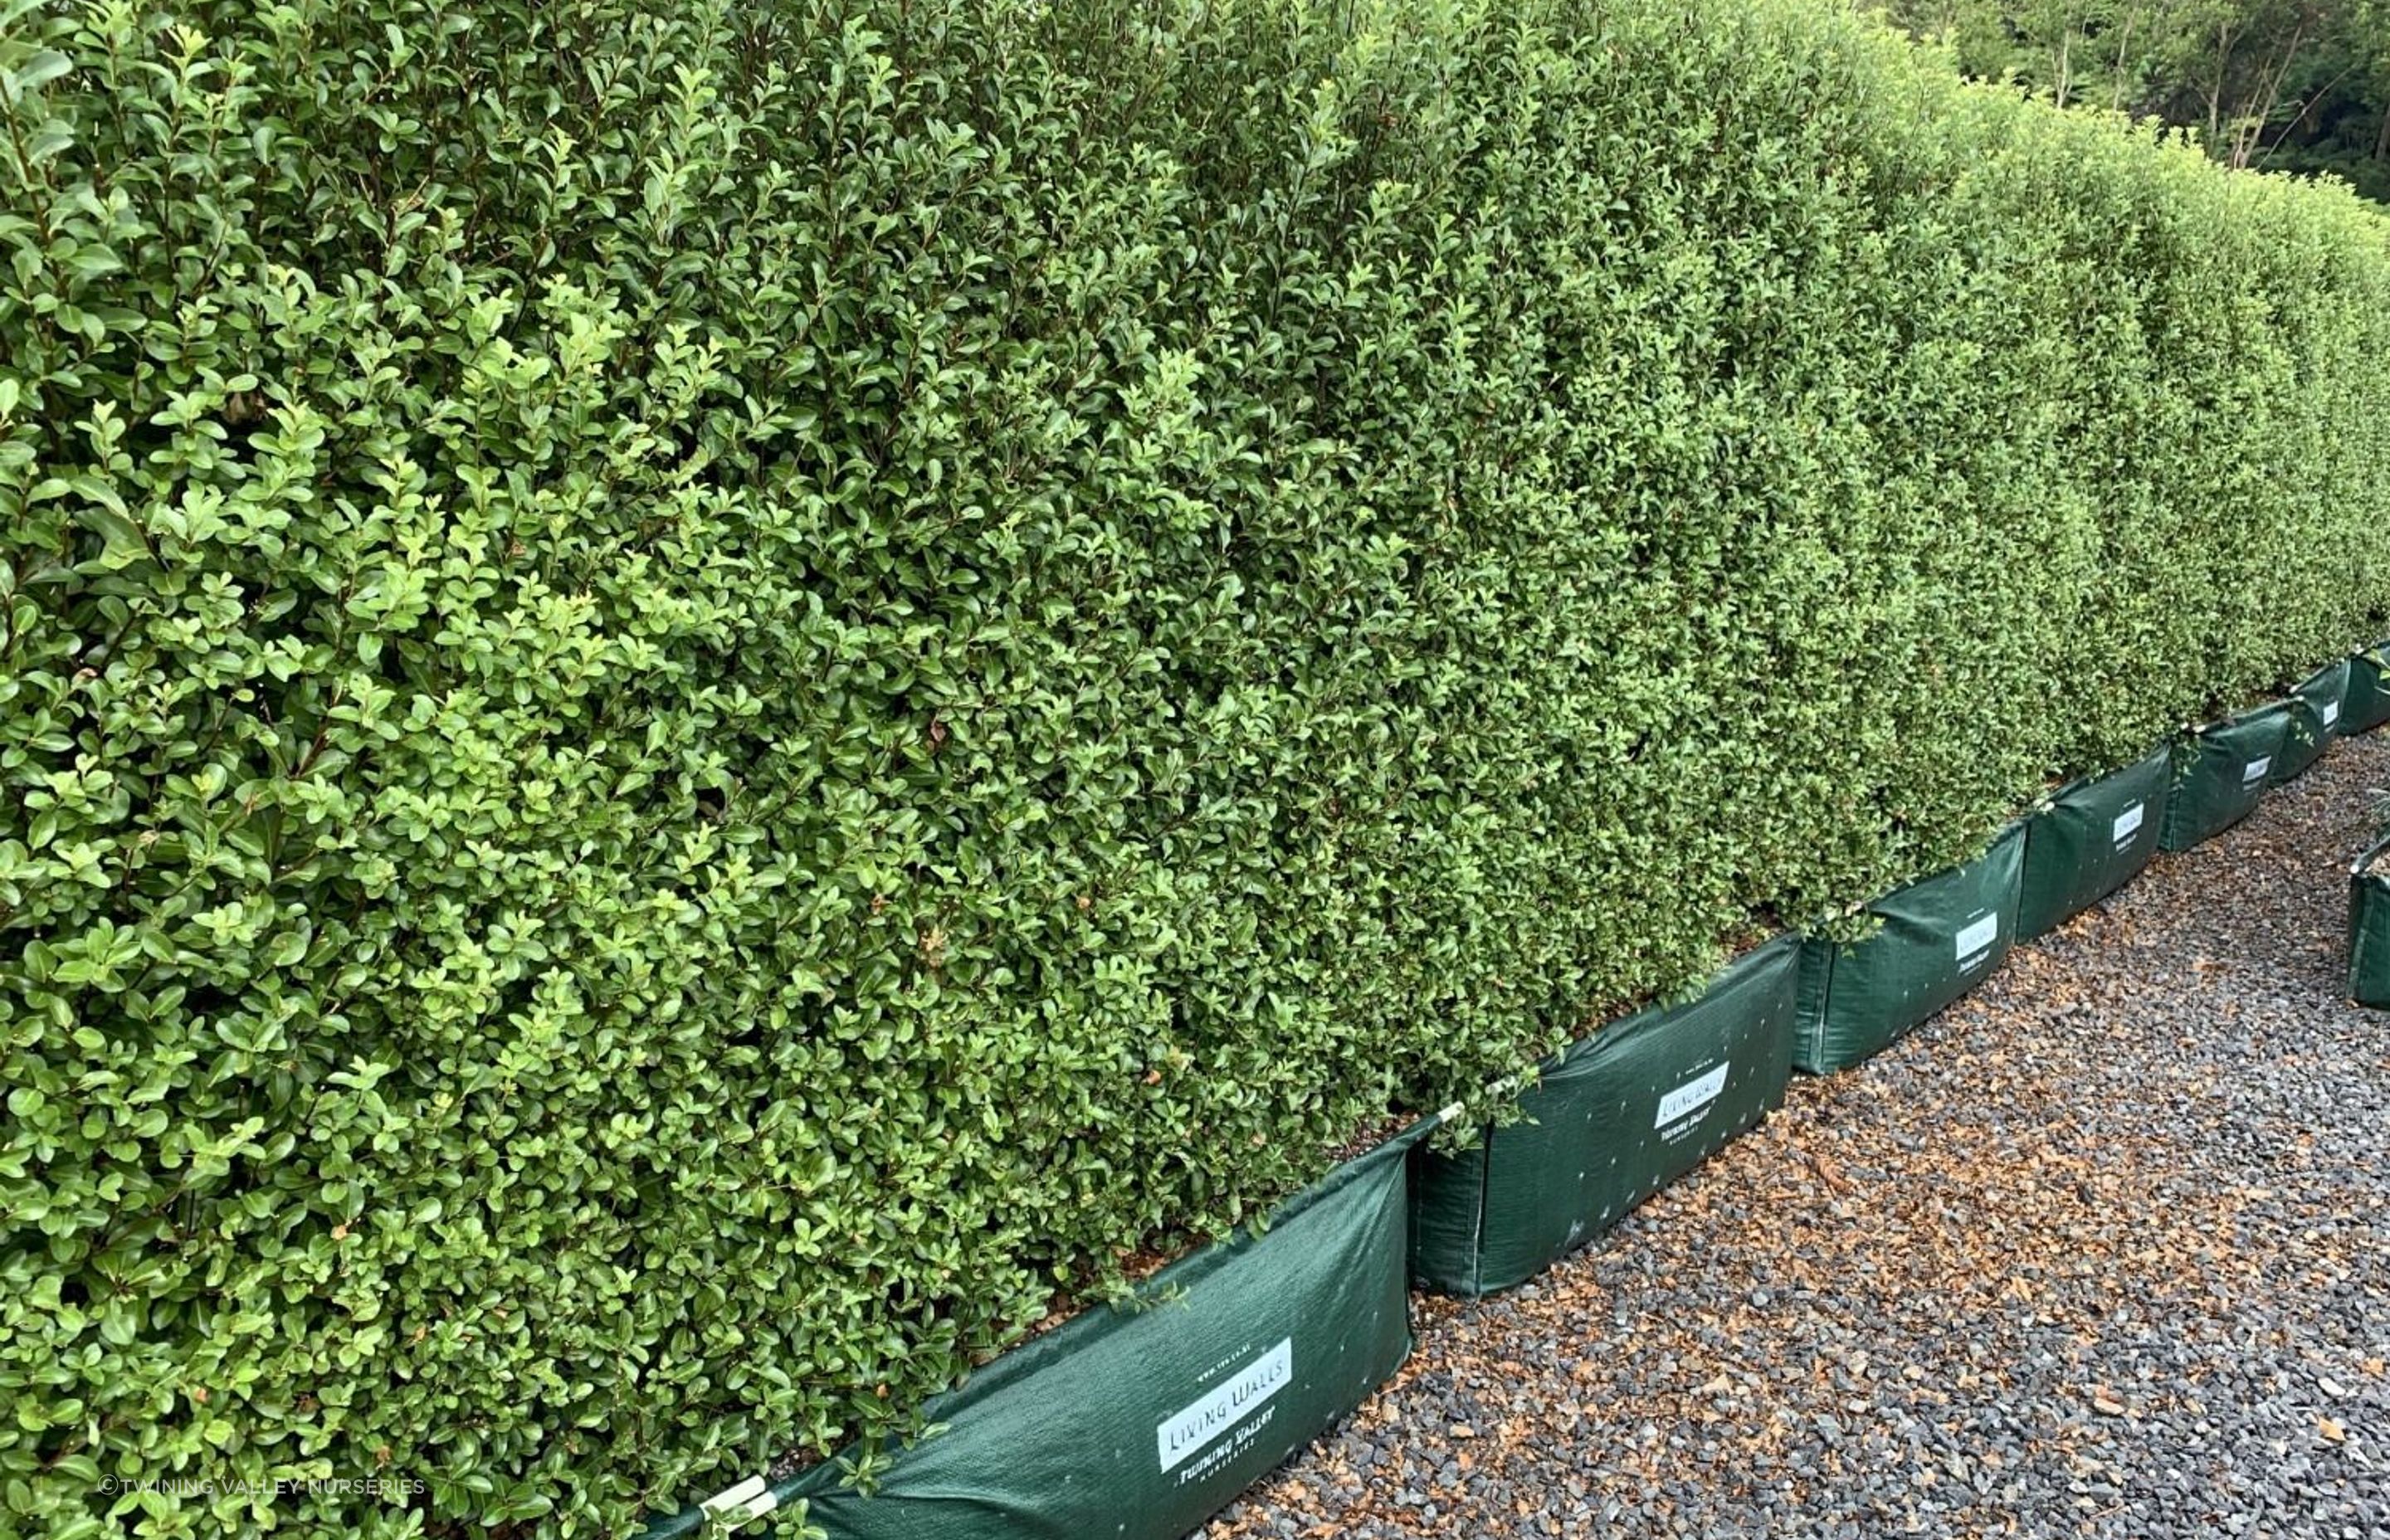 The Pittosporum tenuifolium 'Jade' is a dense, small-leafed New Zealand native hedge that is fast-growing and ideal for sunny sites.